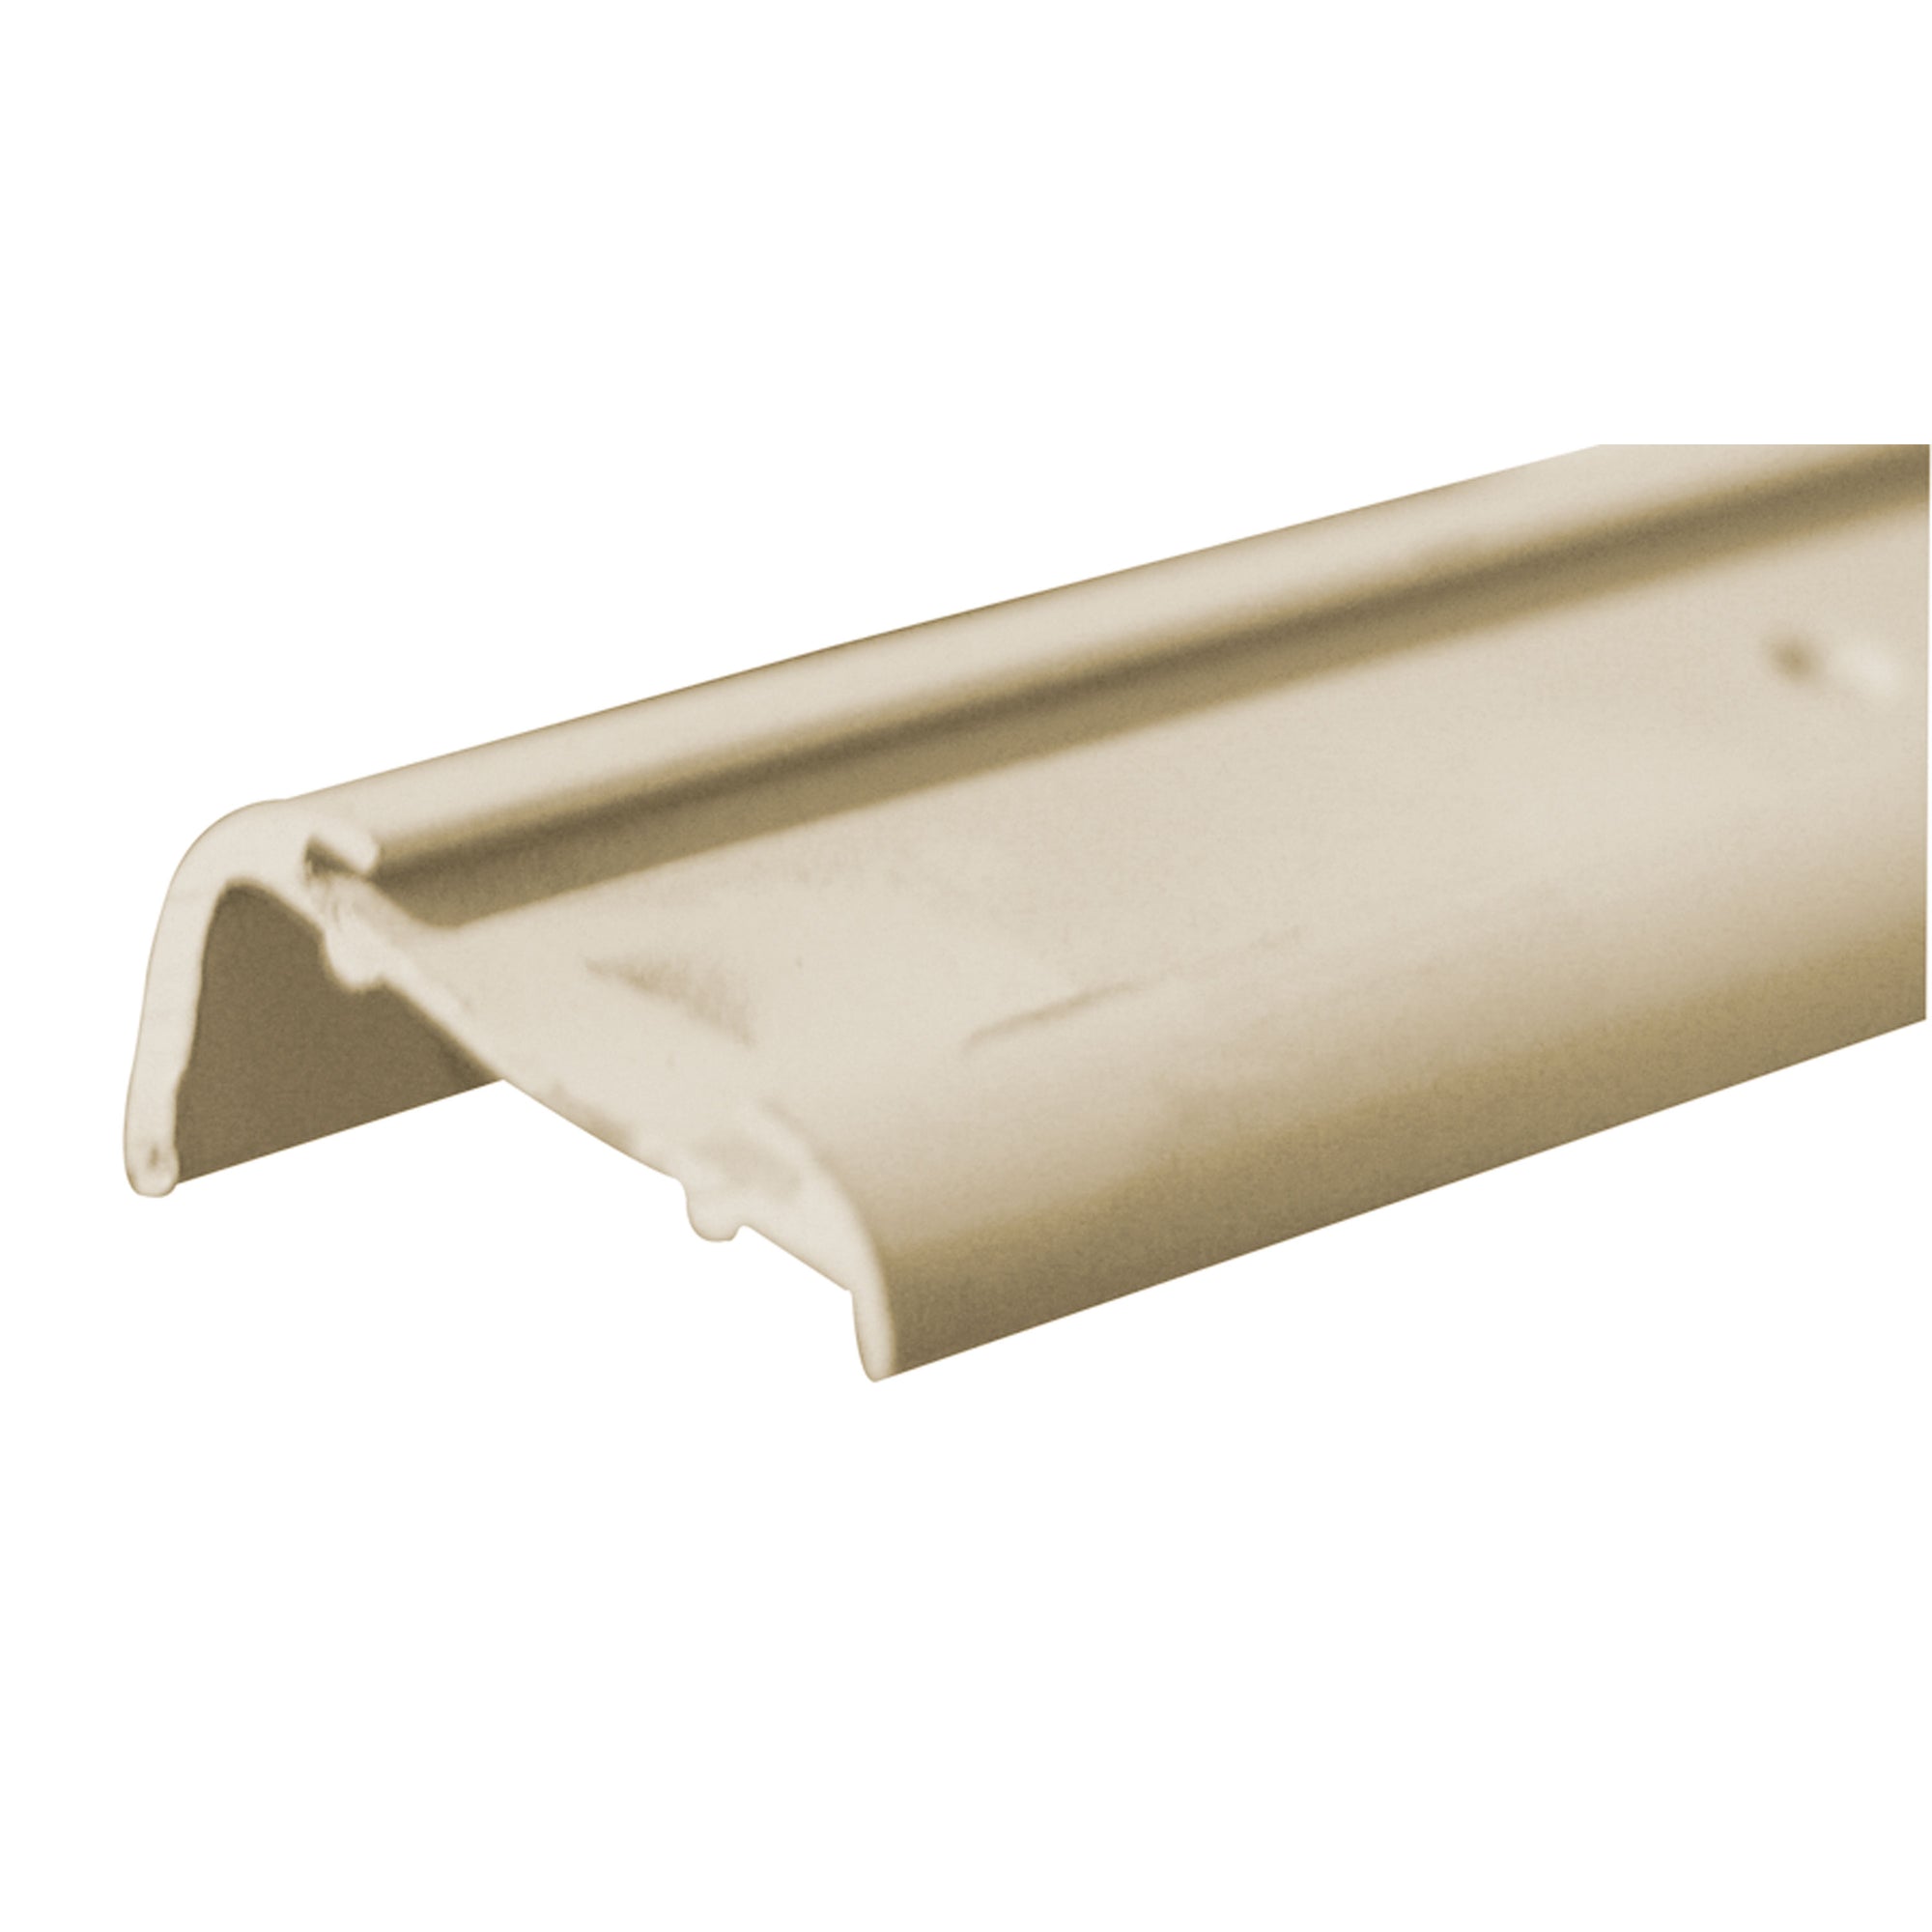 Patrick Metals 164642 Insert Roof Edge with 0.687" Leg Length, Each - 16', Colonial White